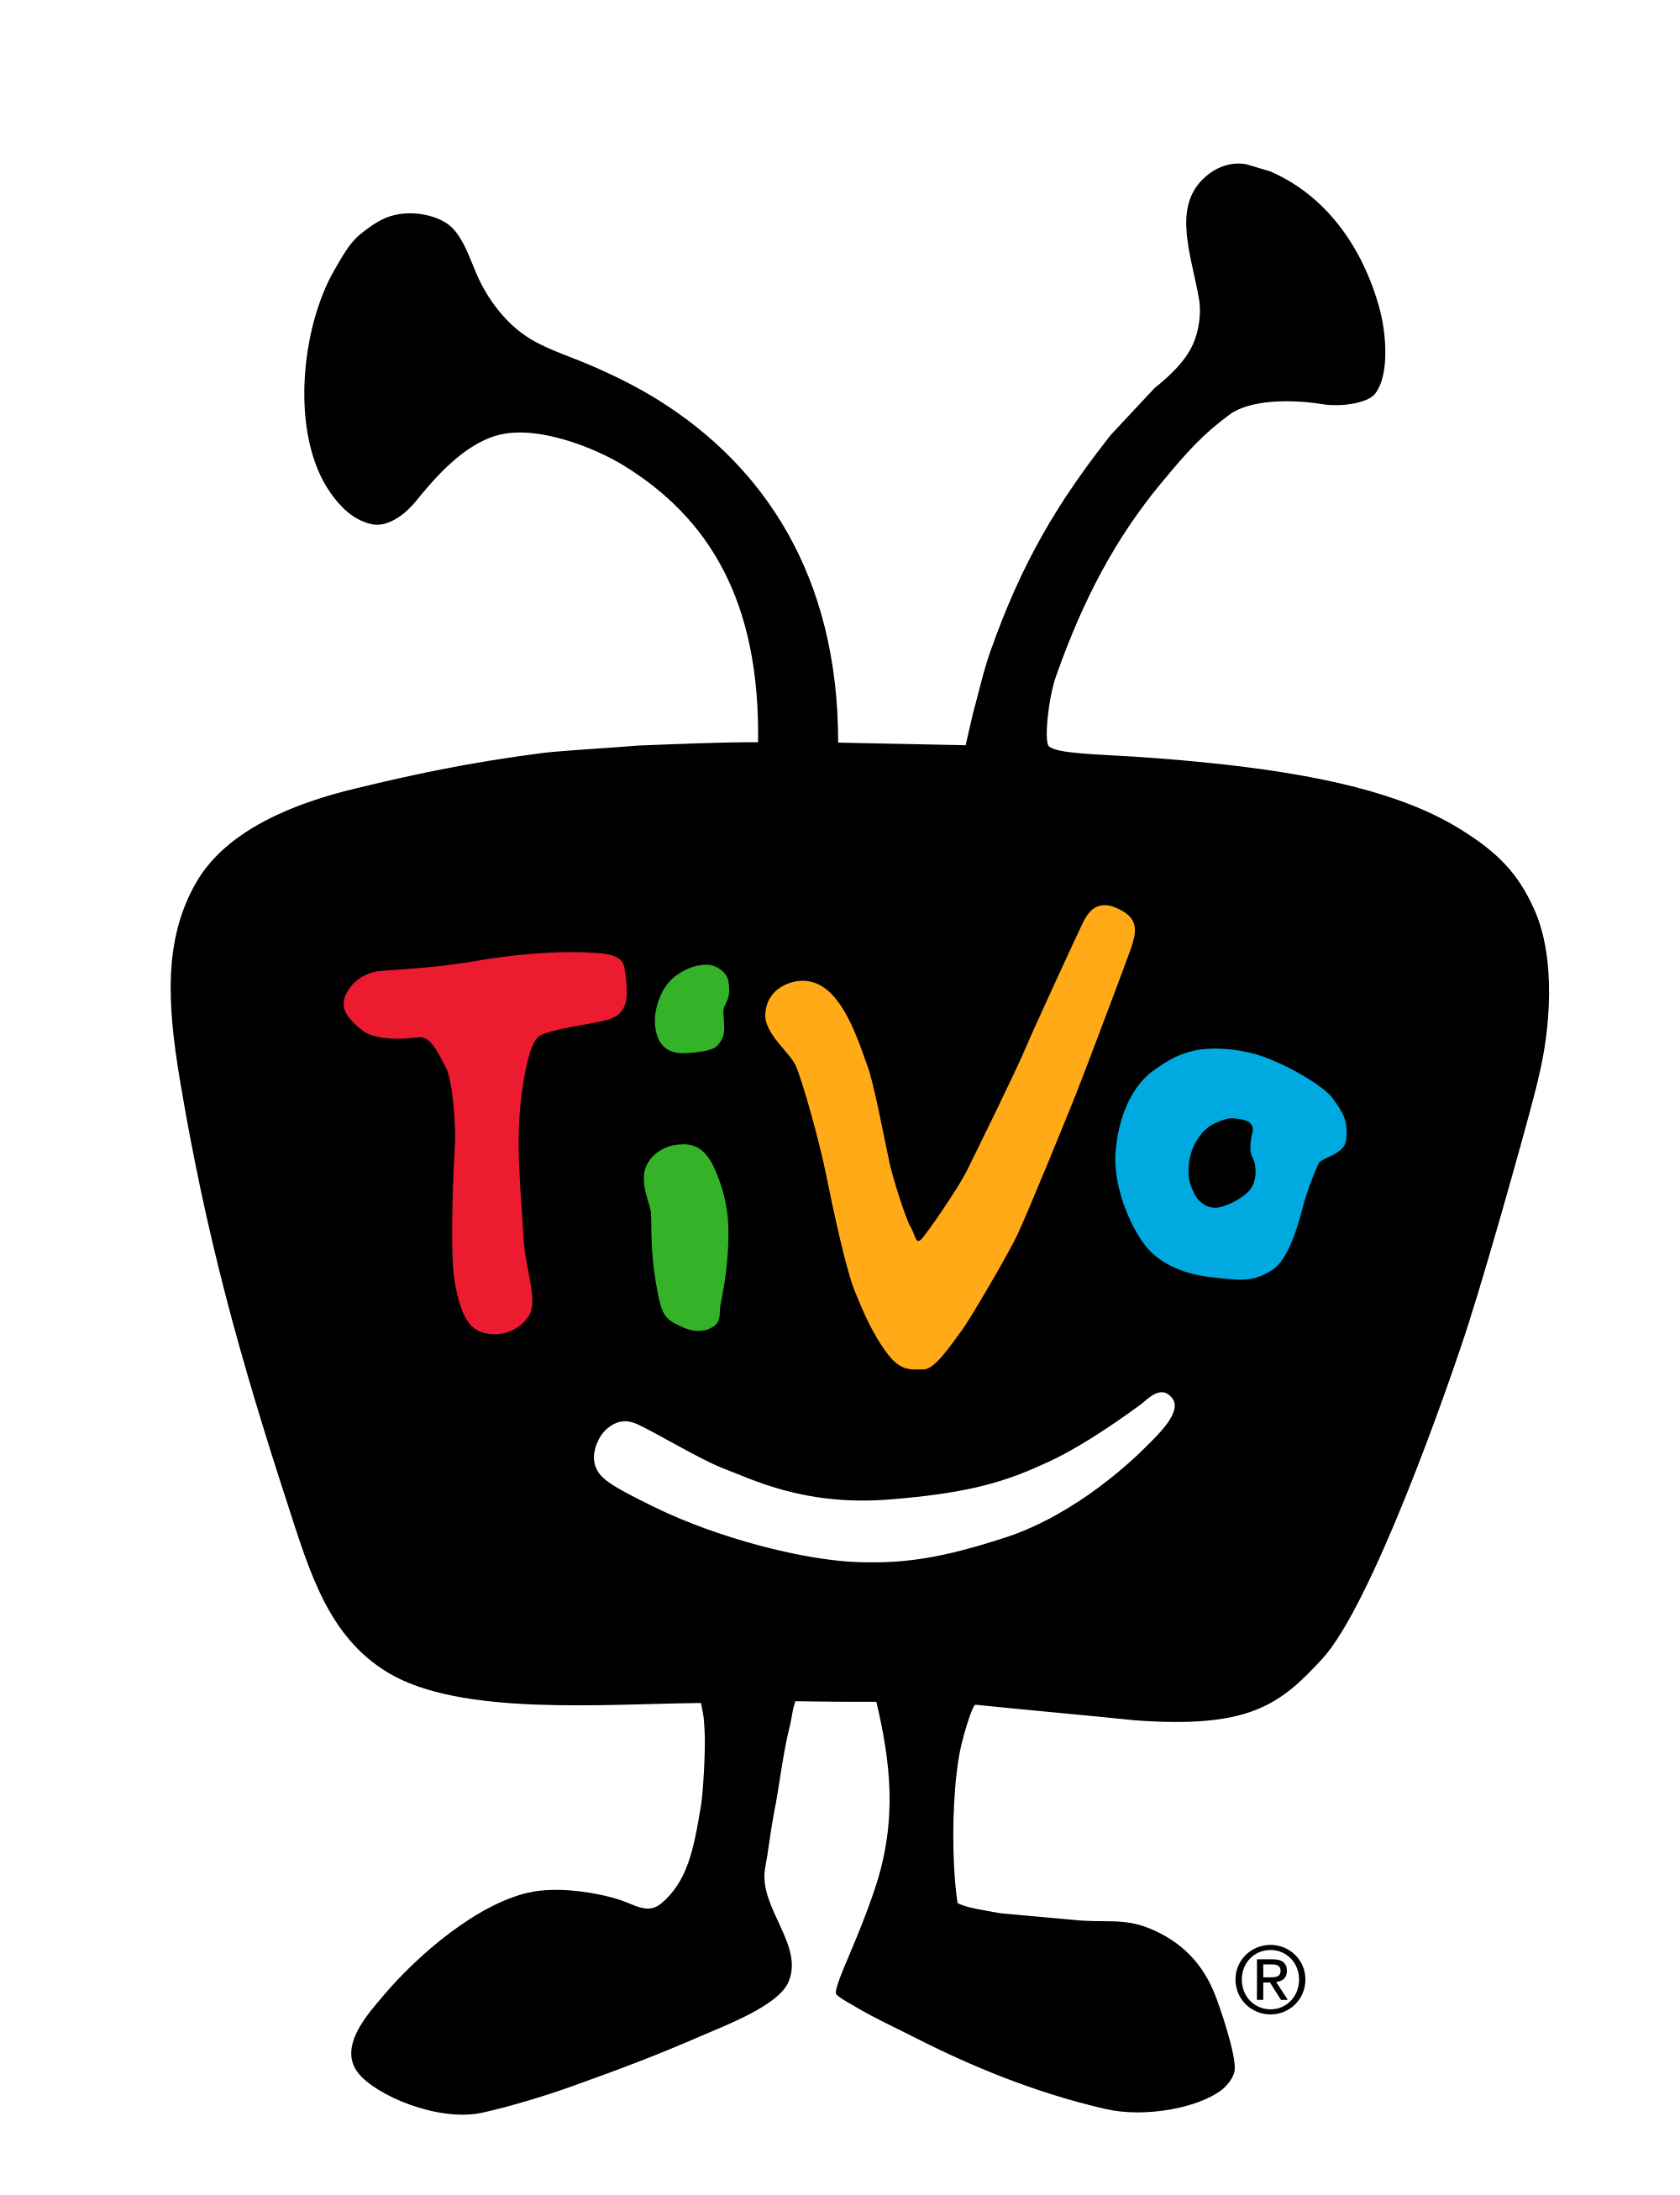 TiVo Logo - TiVo Tries A New Look - Multichannel